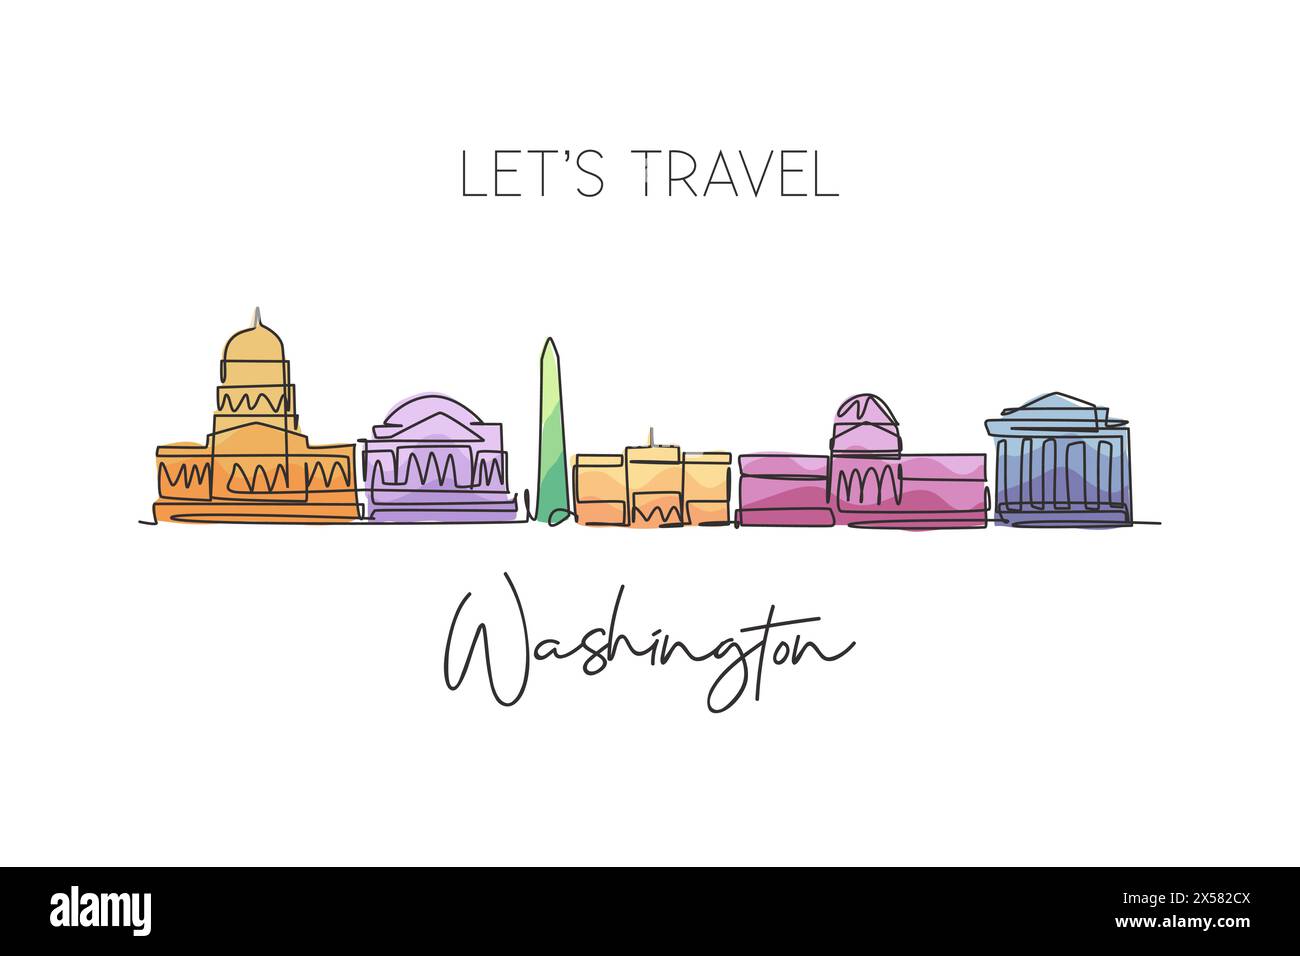 Single continuous line drawing of Washington city skyline, USA. Famous city scraper landscape. World travel concept home wall decor poster print art. Stock Vector